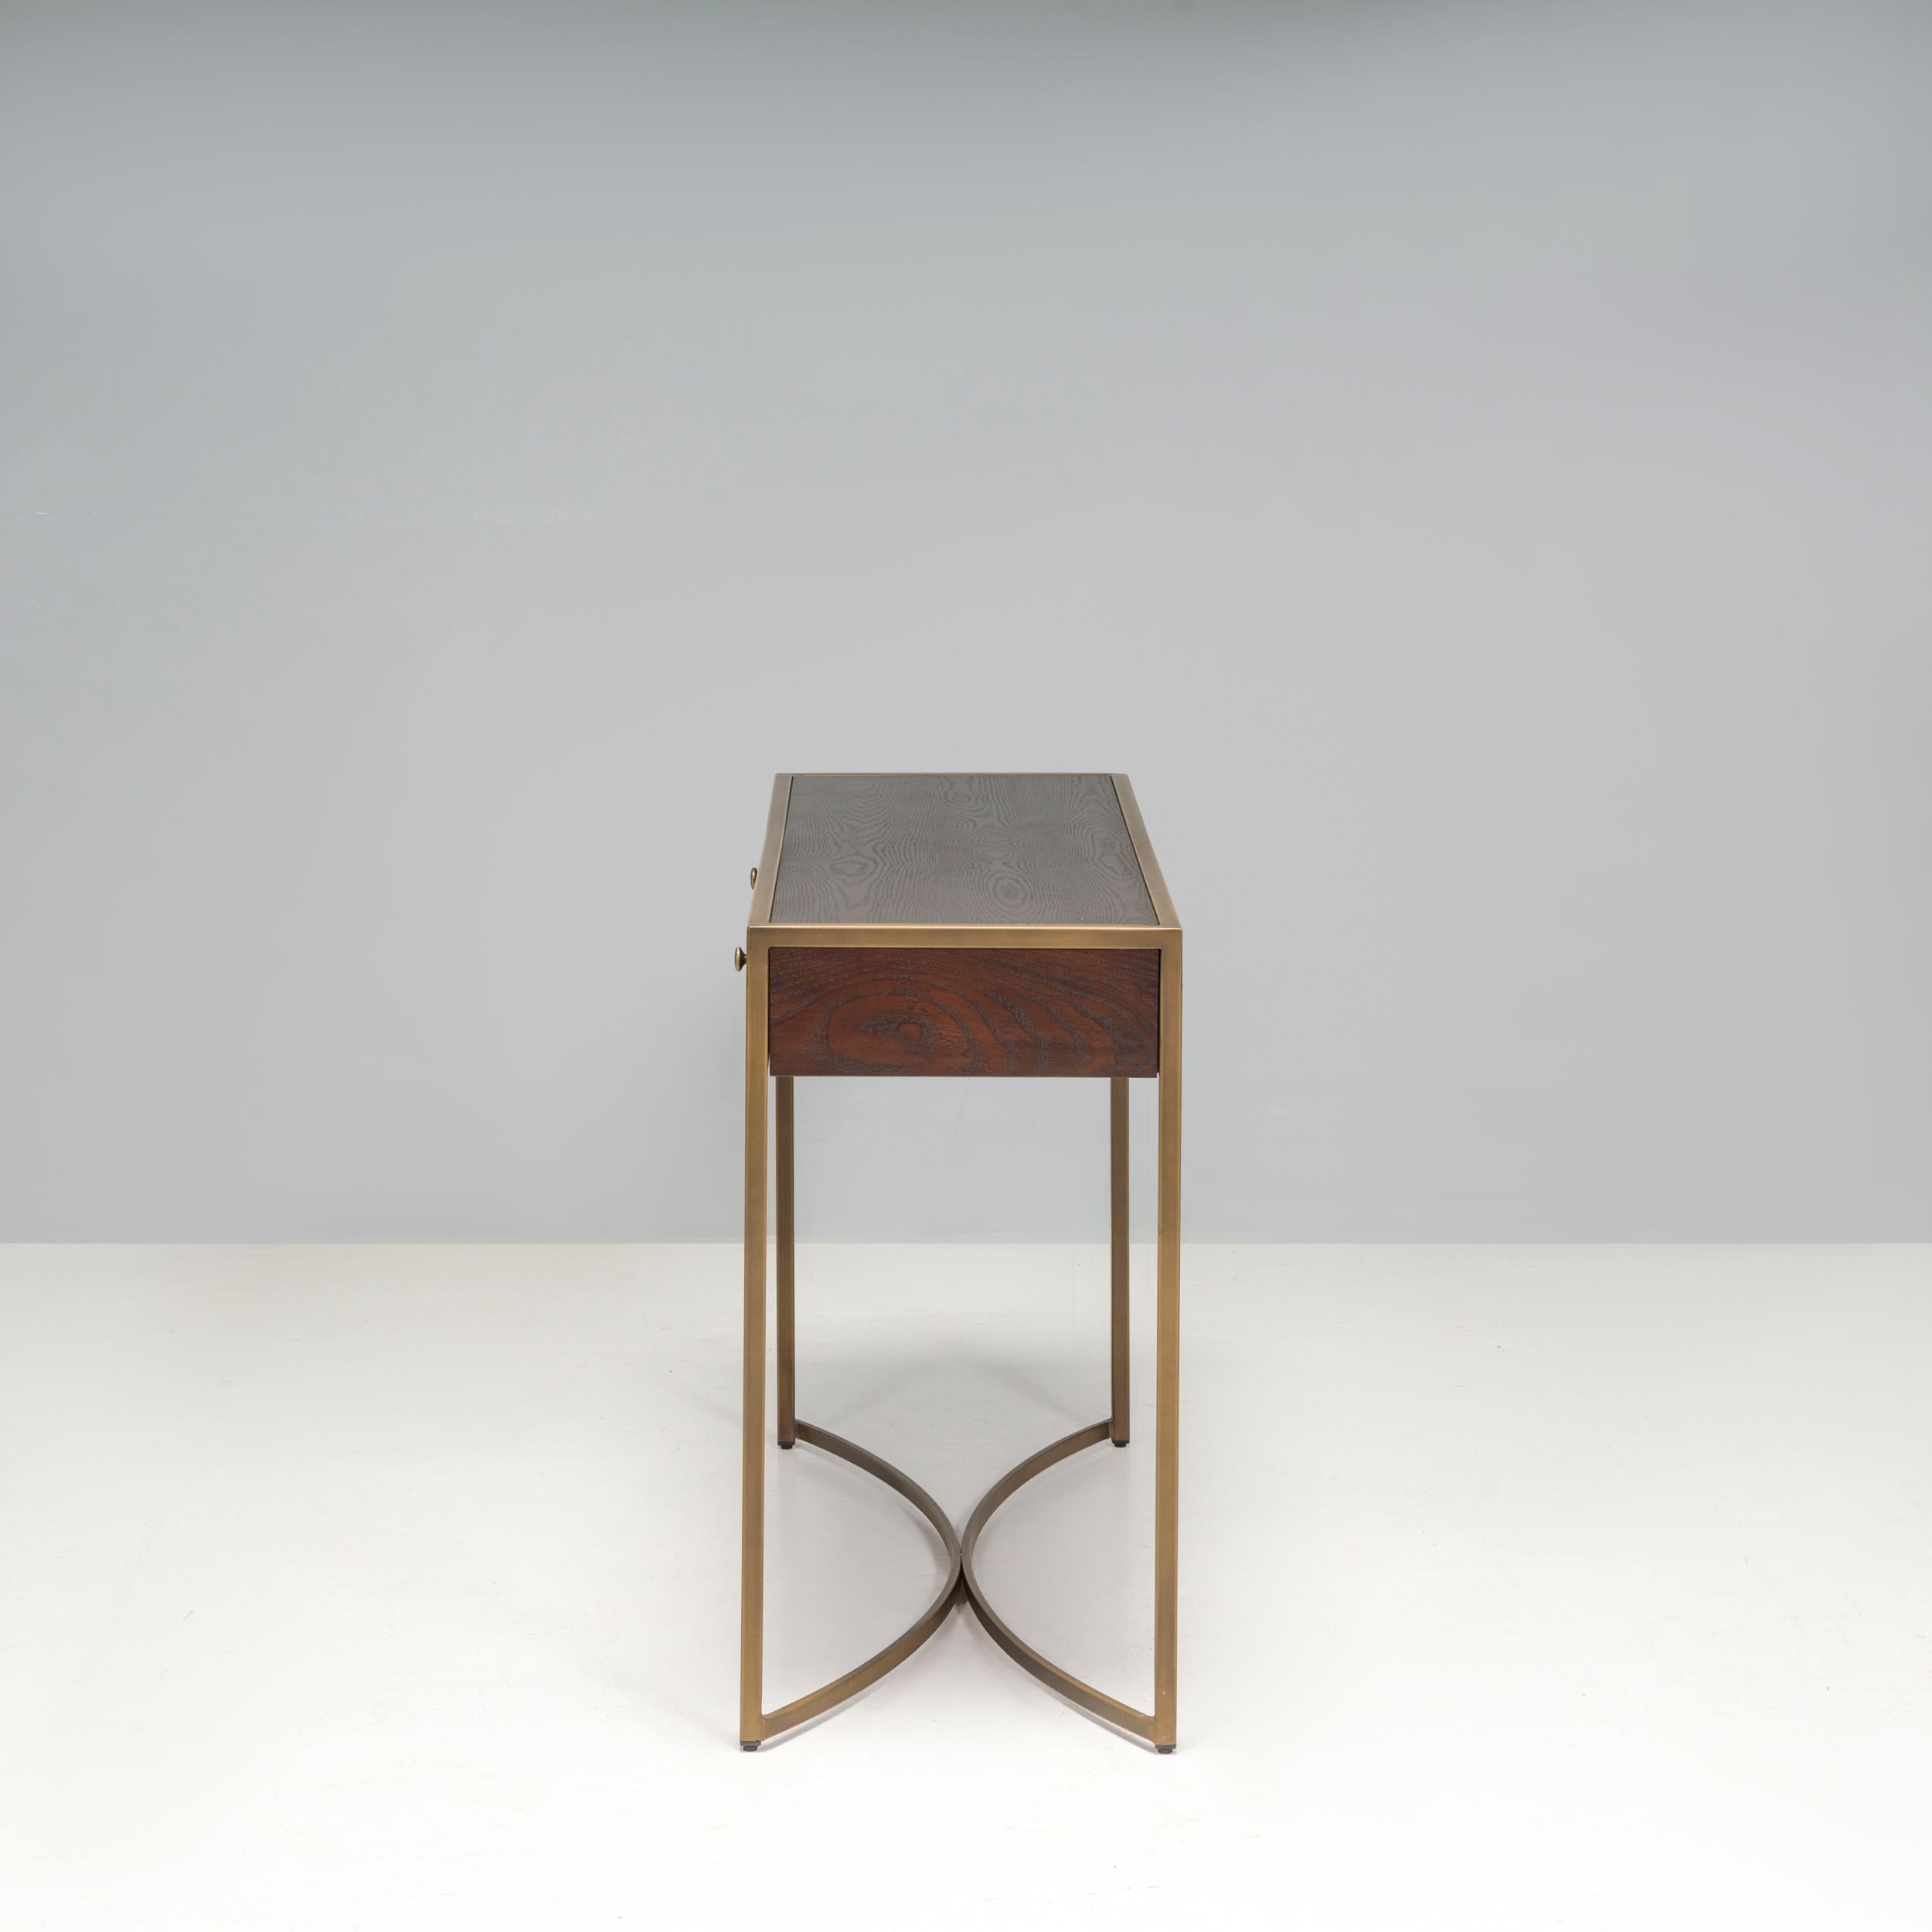 Established in 2011, Liang & Eimil create timeless furniture with quality materials and sustainability at the forefront of their designs. The Rivoli dressing is constructed from a brown ash veneer with brass metal trim, which continues into the